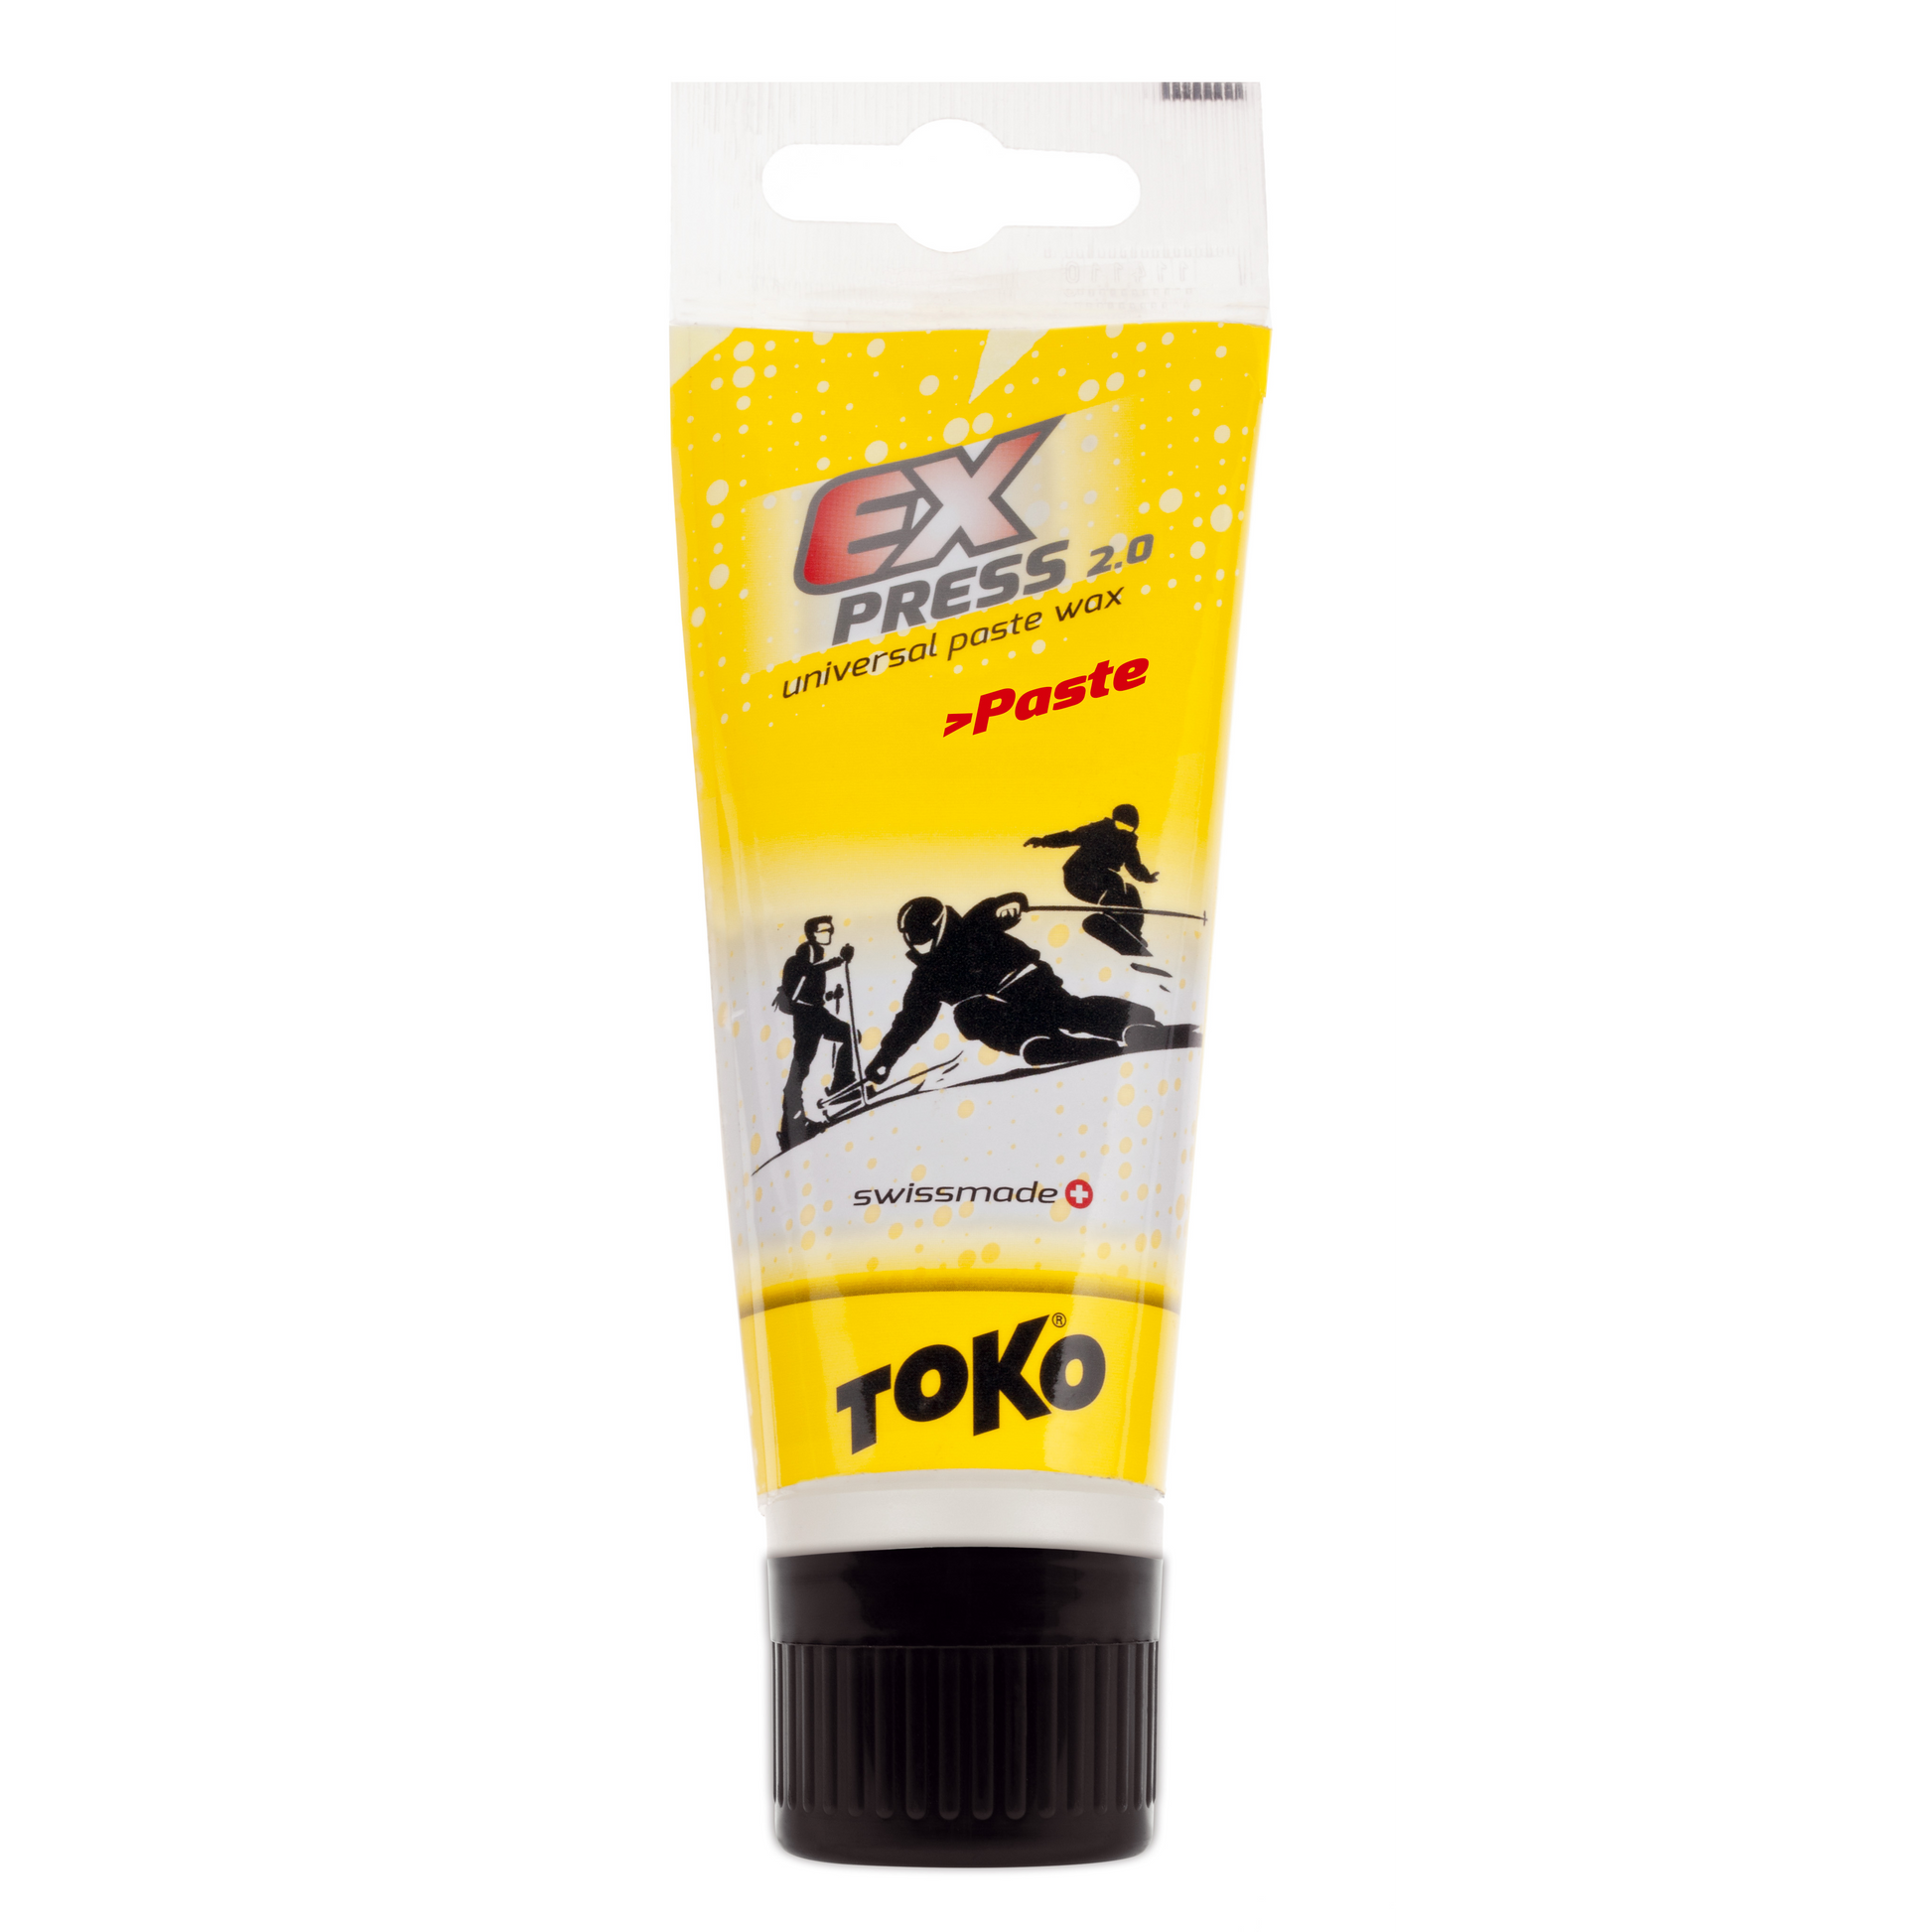 A product picture of the Toko Express Paste